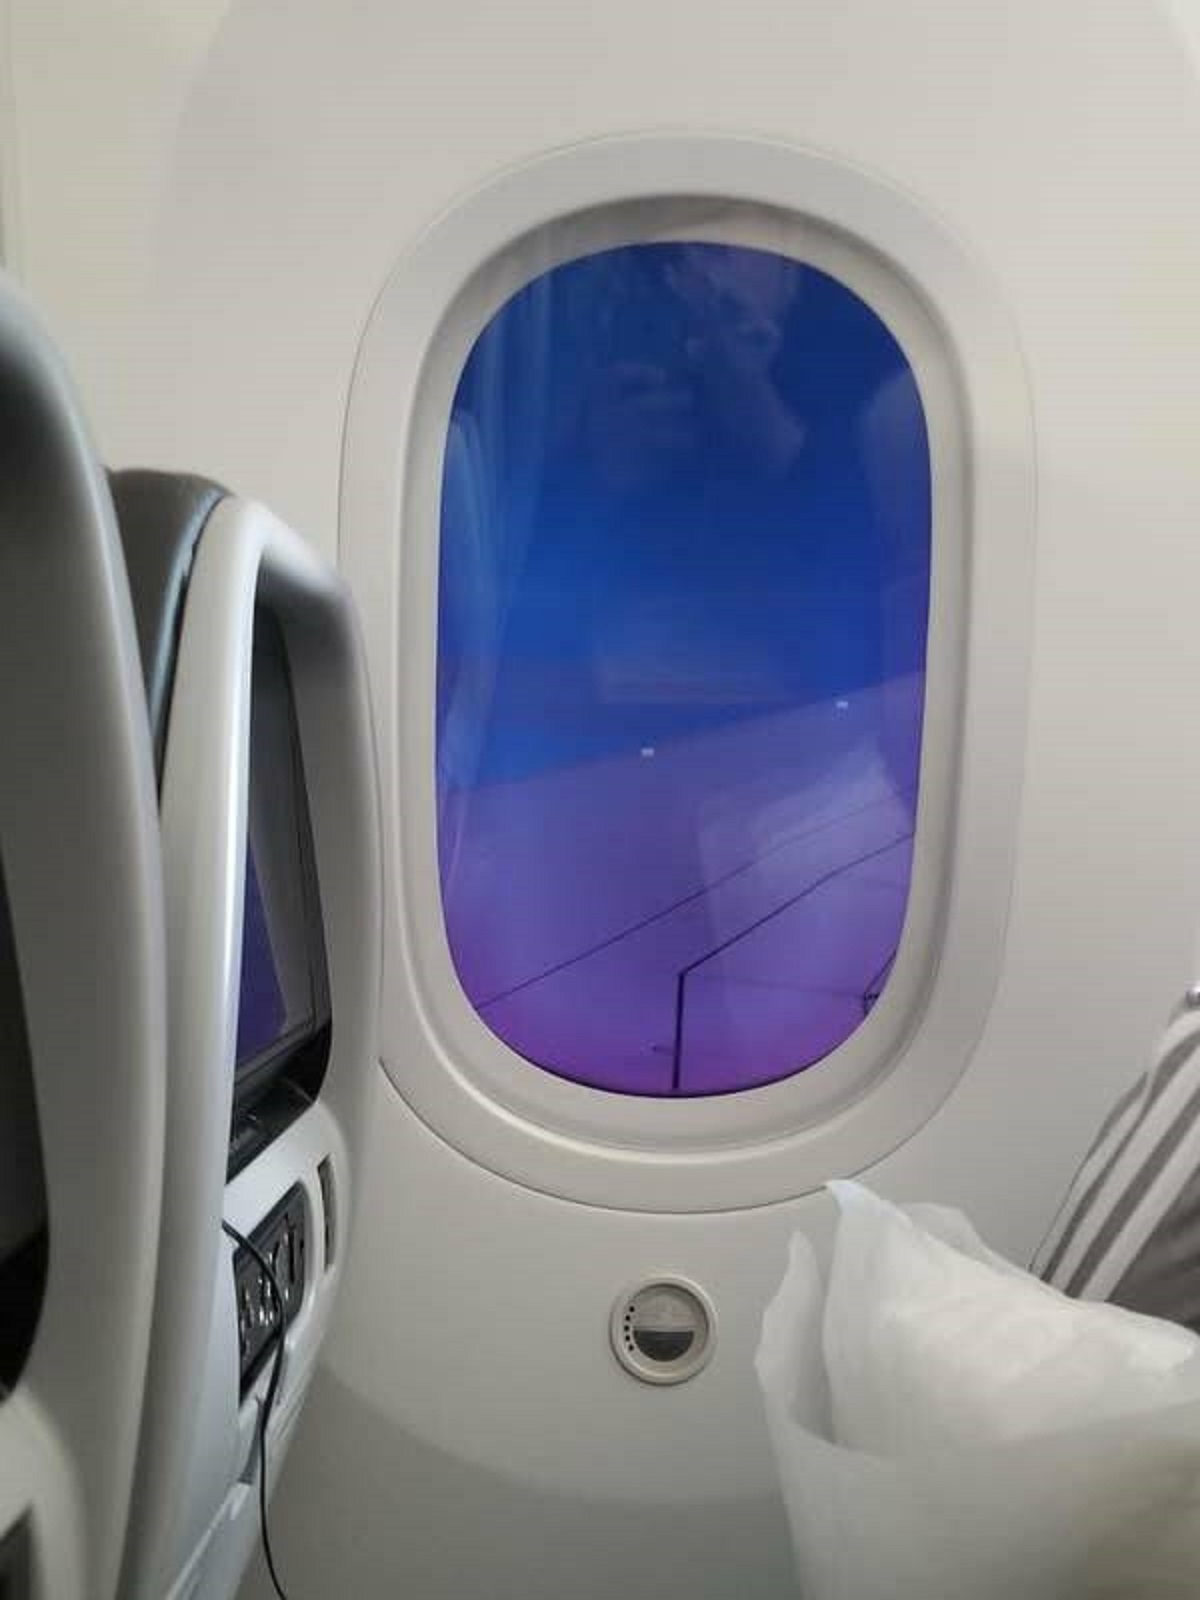 This is a plane window that lets you adjust and tint the window to your liking: